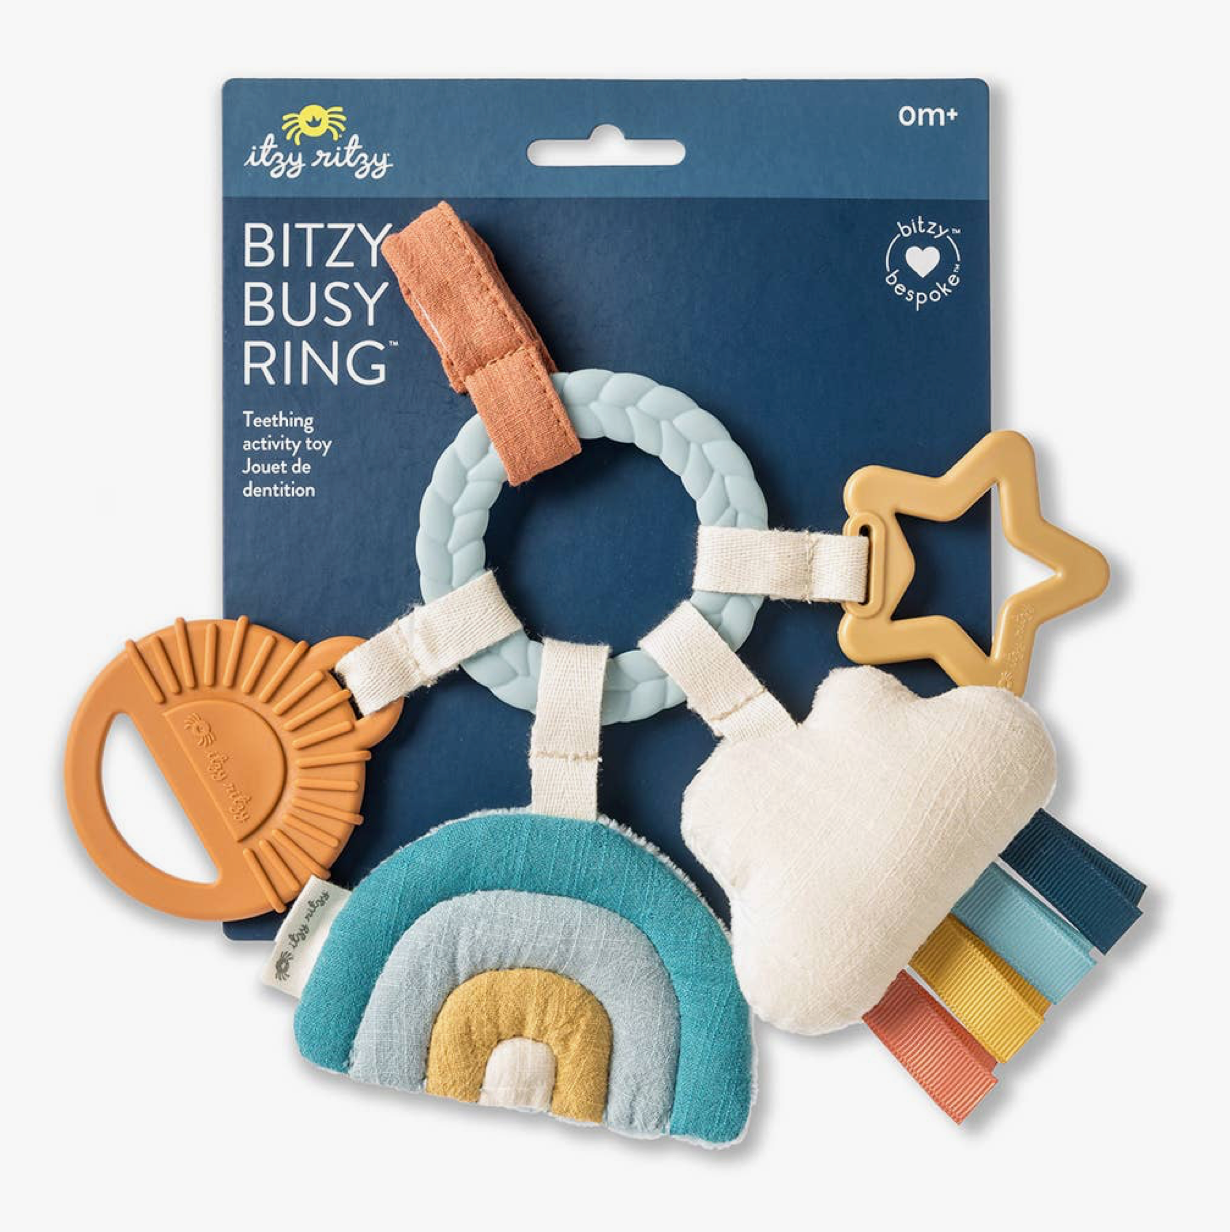 Itzy Ritzy Bitzy Busy Ring™ Teething Activity Toy - Little Birdies